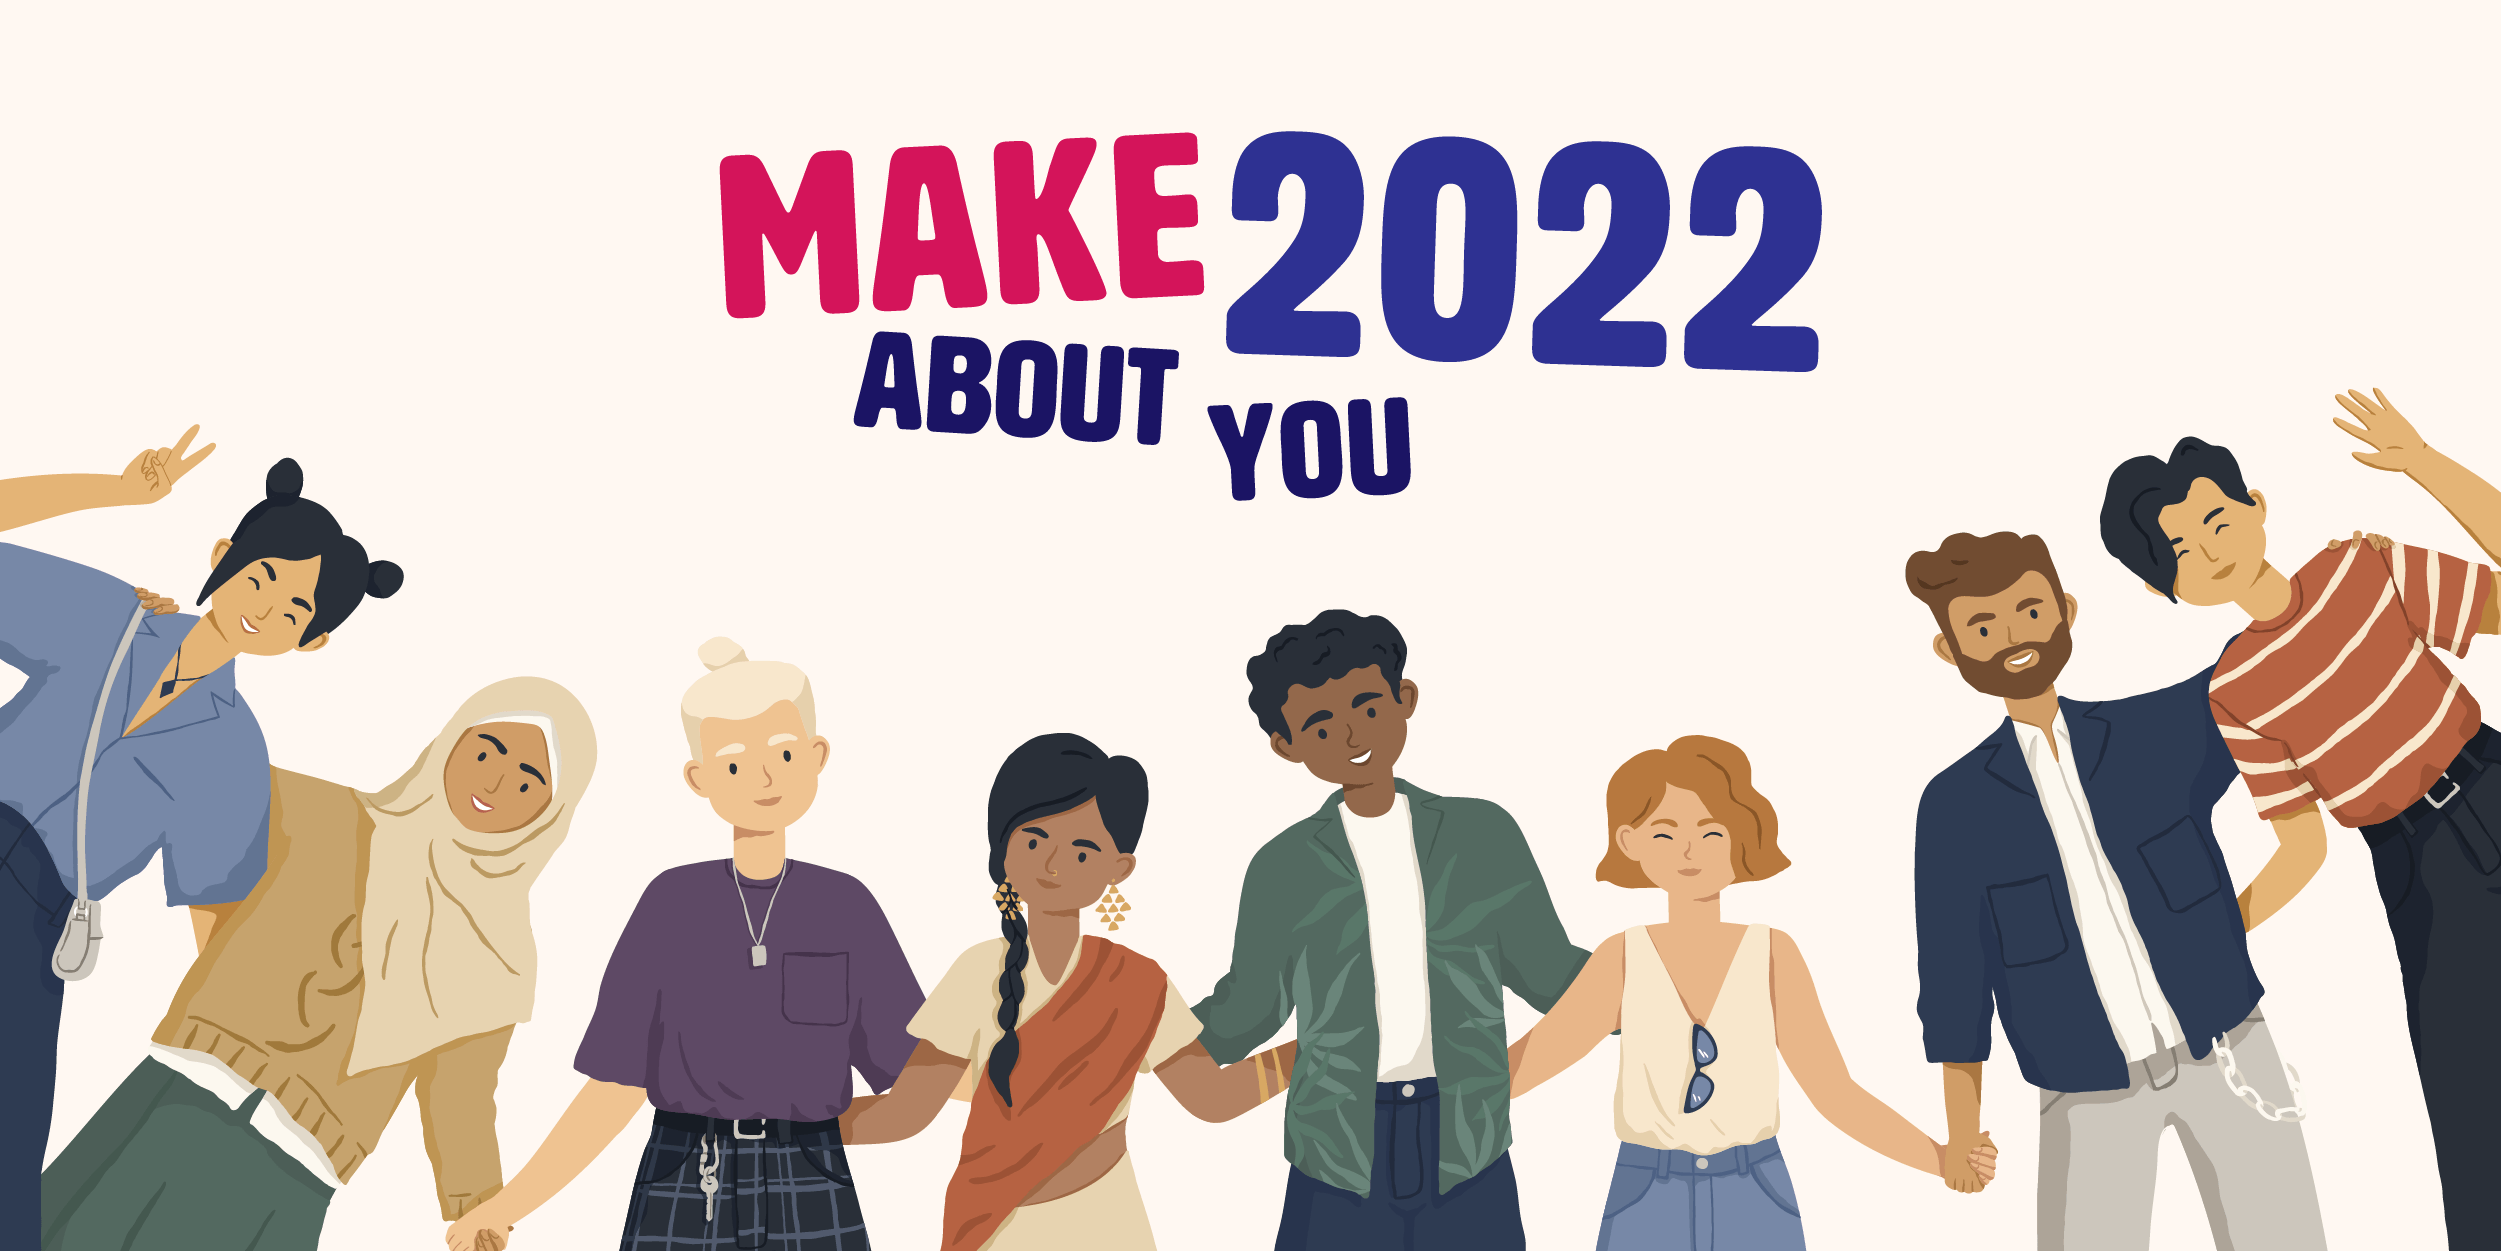 Make 2022 About You!